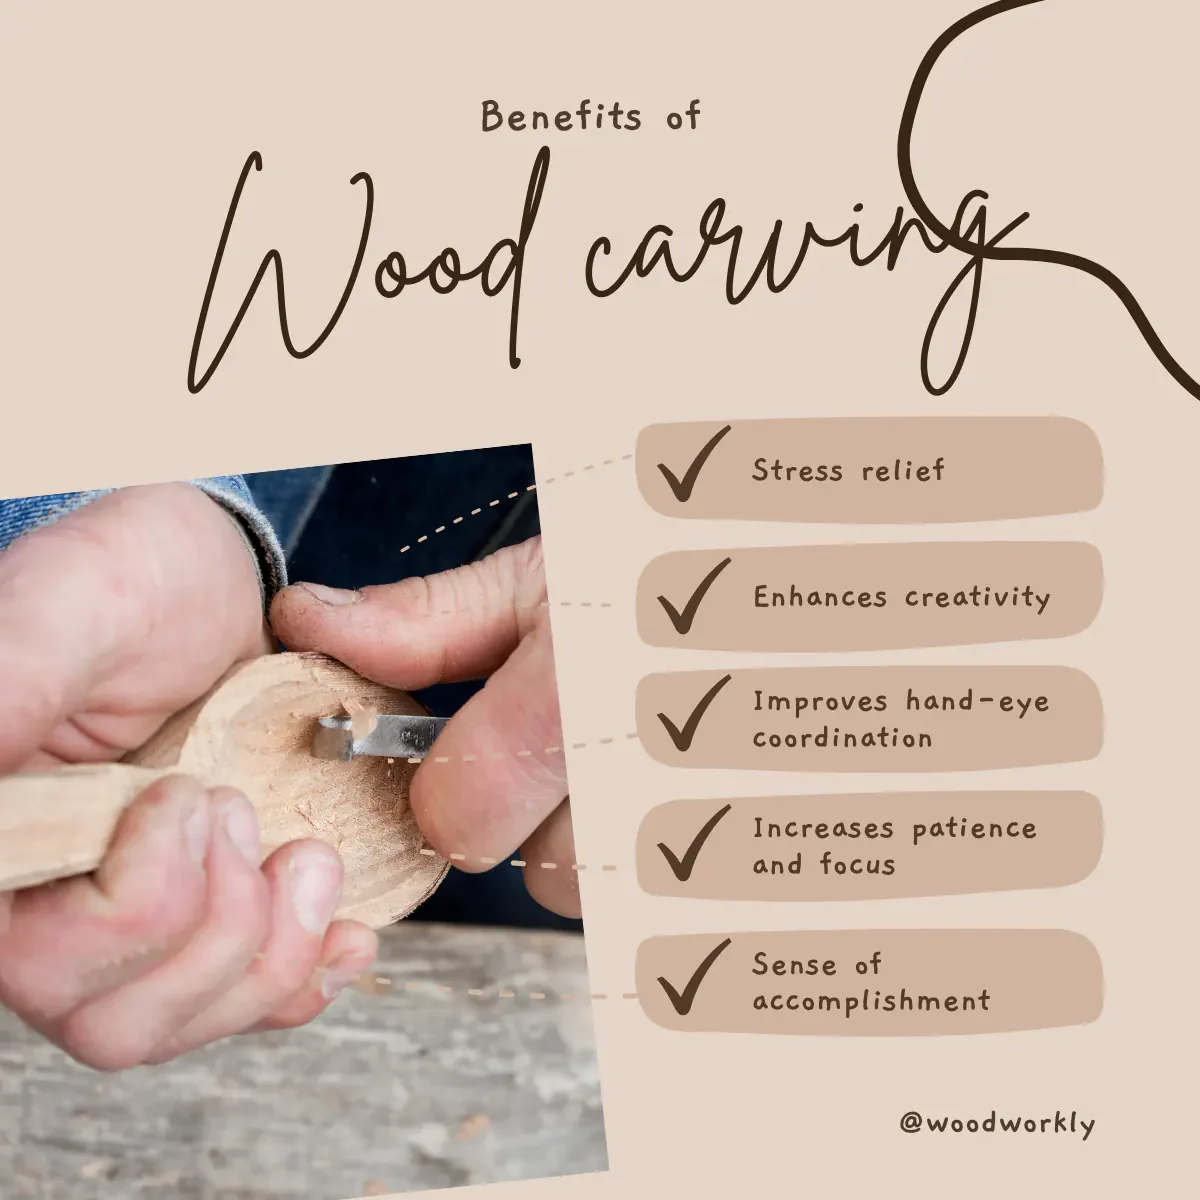 benefits of wood carving